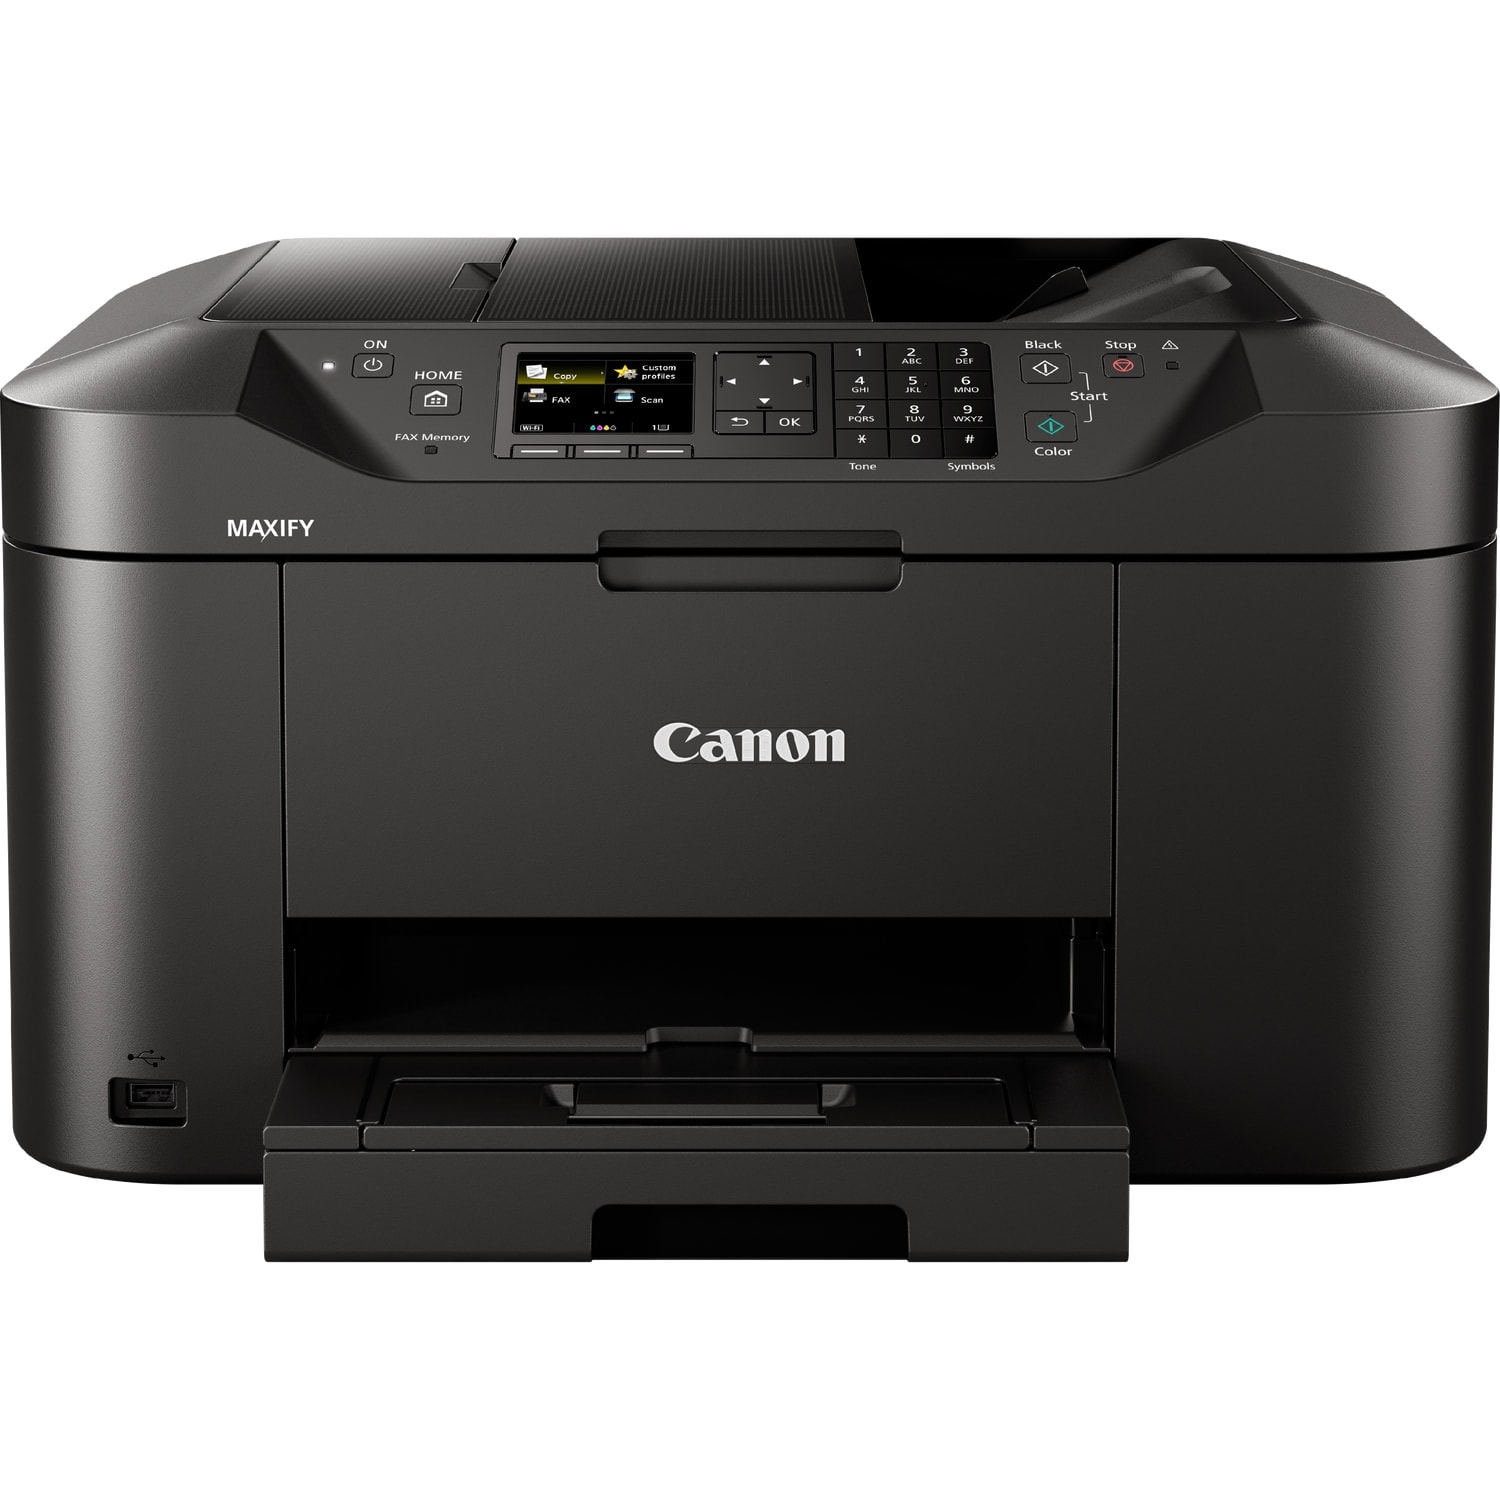 Imprimante multifonction Canon MAXIFY MB2150 - grosbill-pro.com - 2